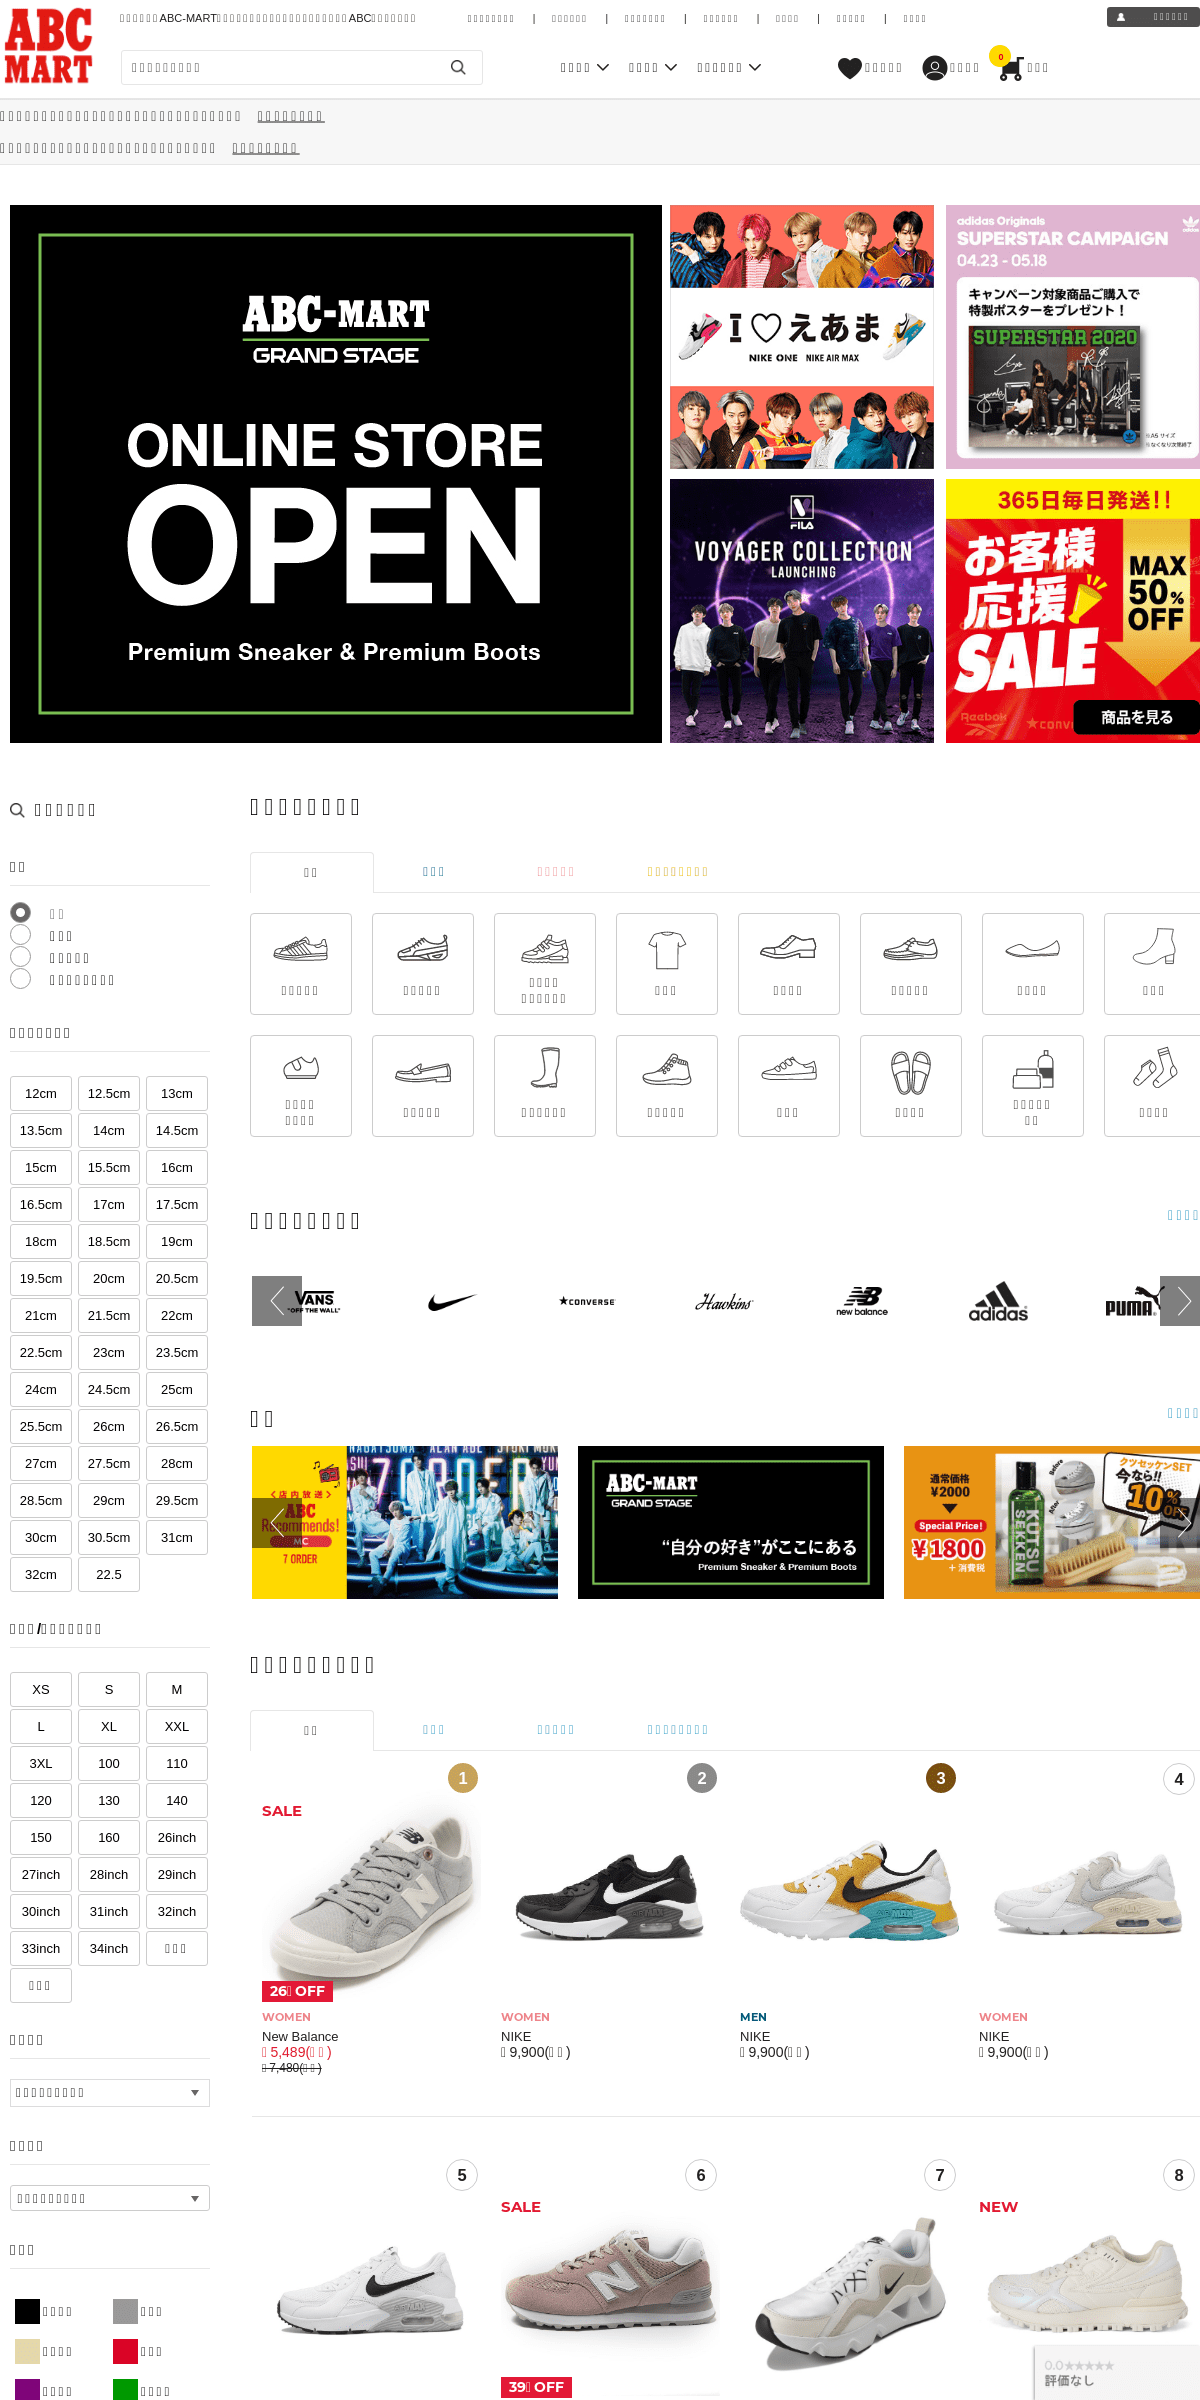 A complete backup of abc-mart.com